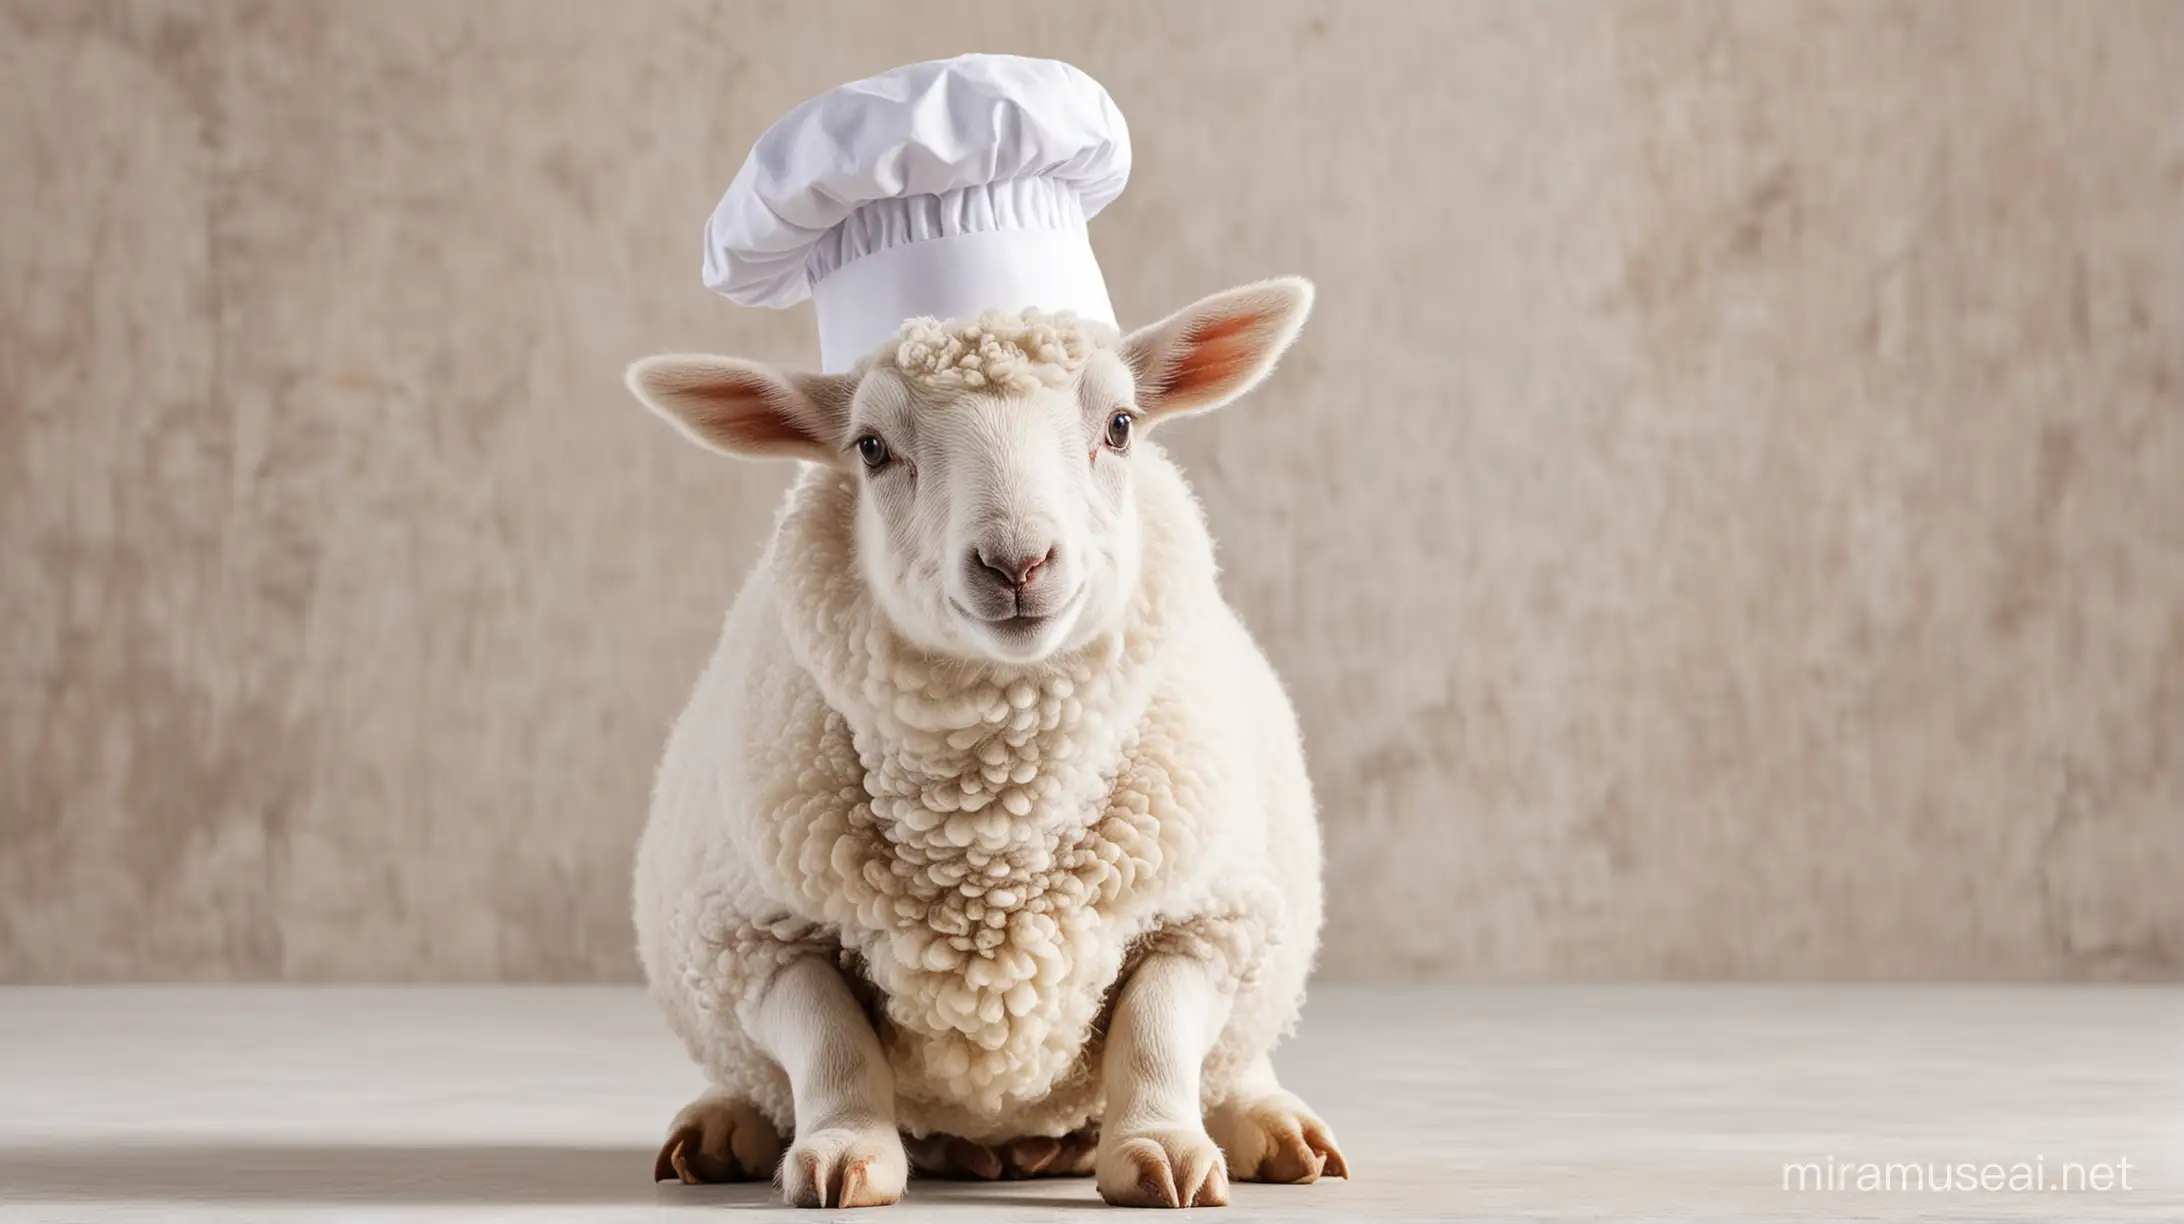 Charming Lamb in Chefs Hat Cooking in a Rustic Kitchen